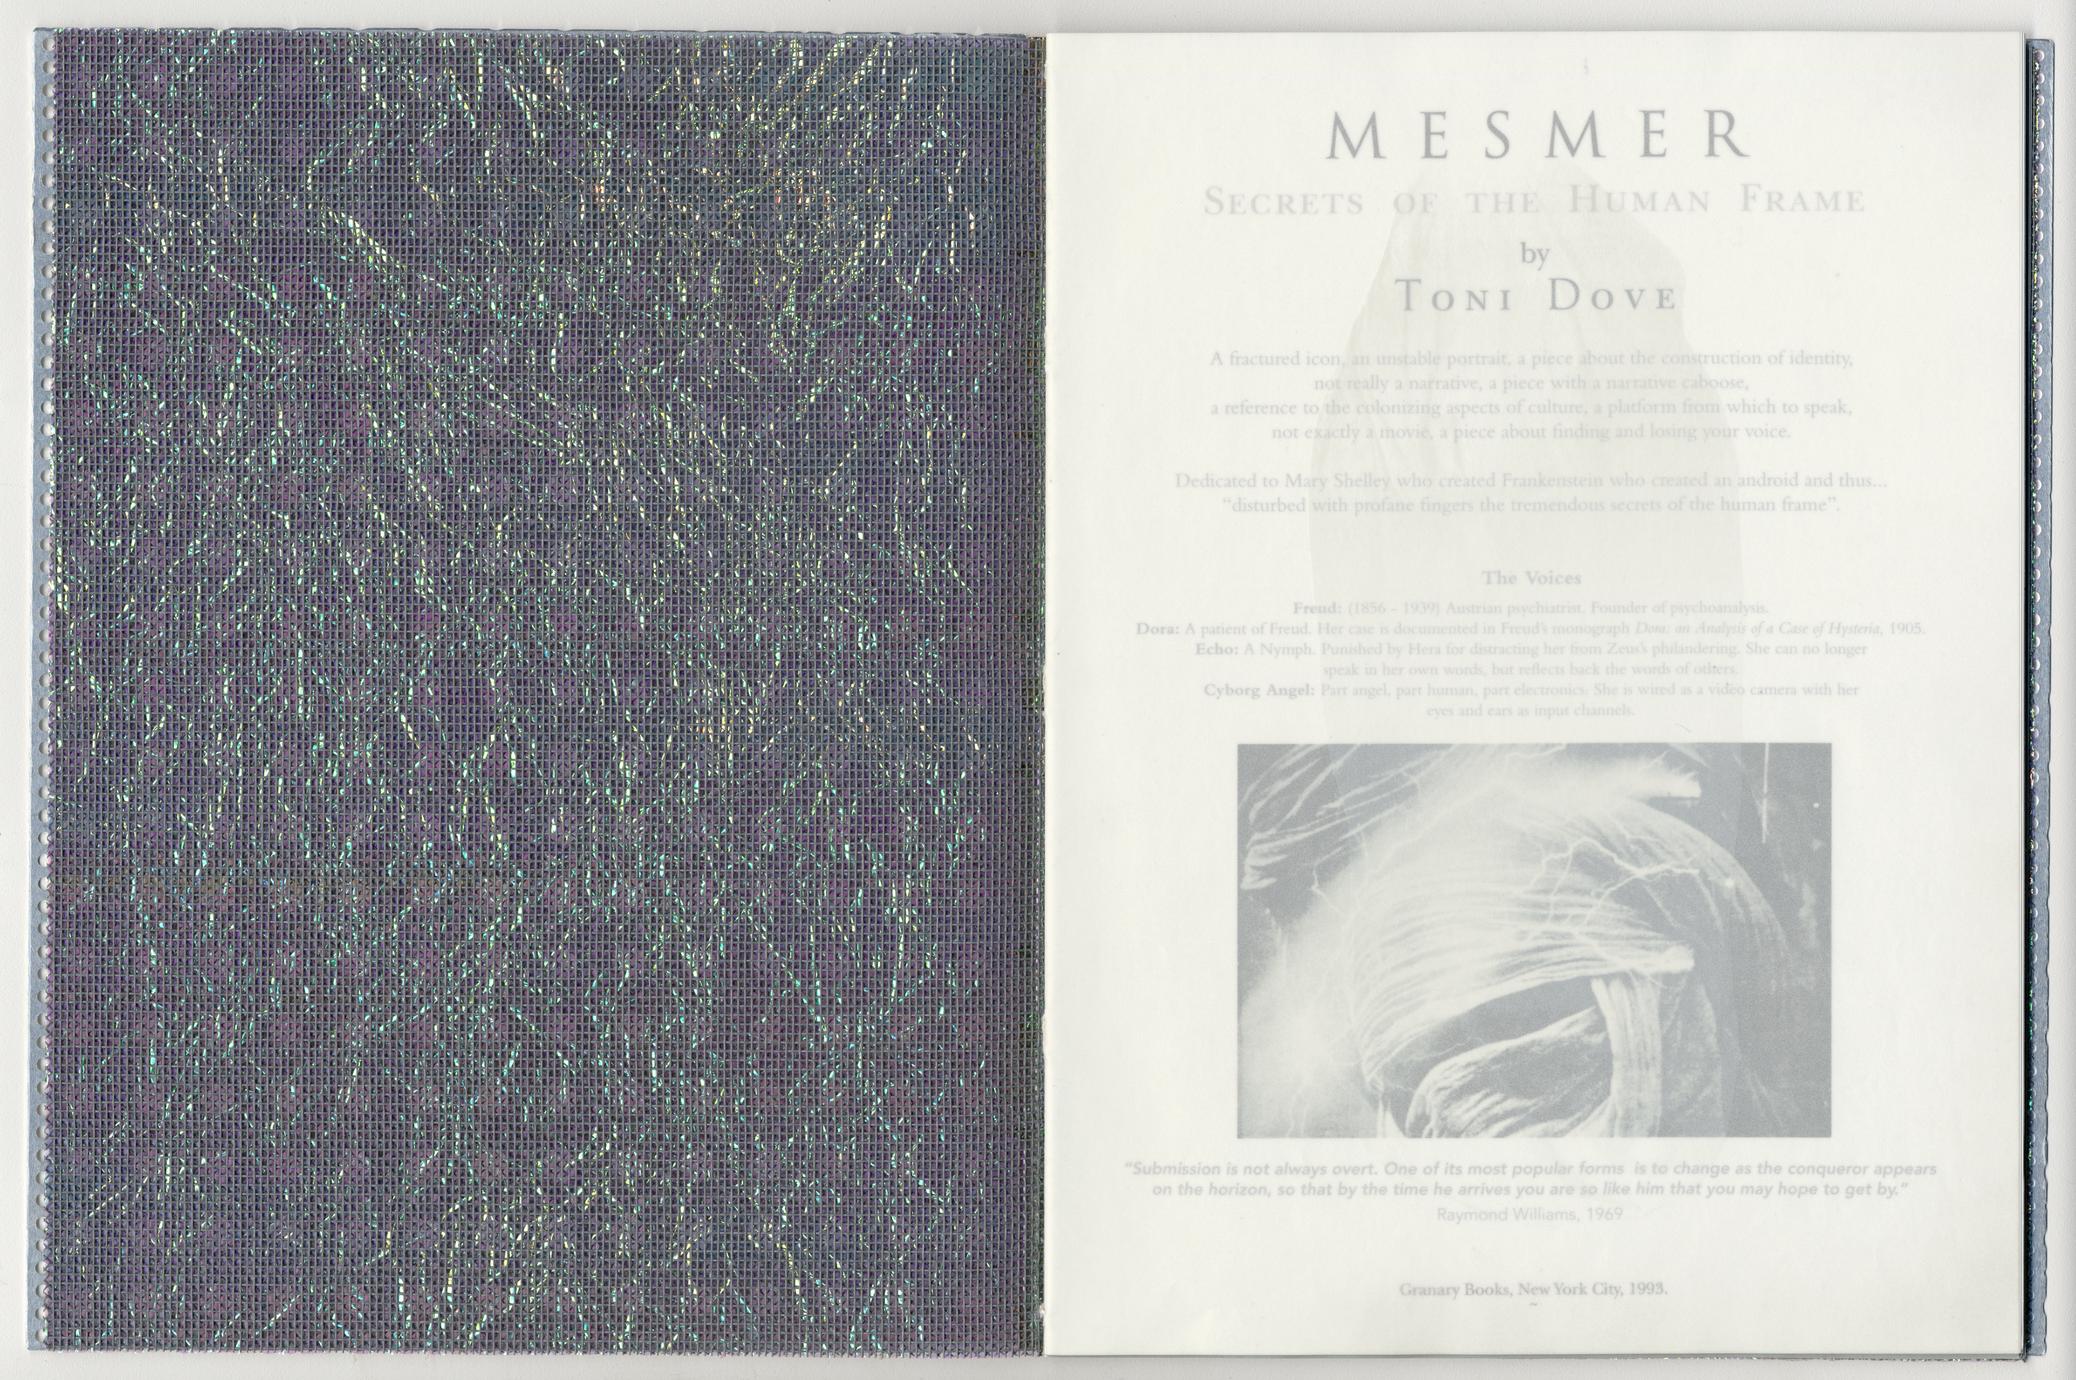 Mesmer : secrets of the human frame (1 of 2)